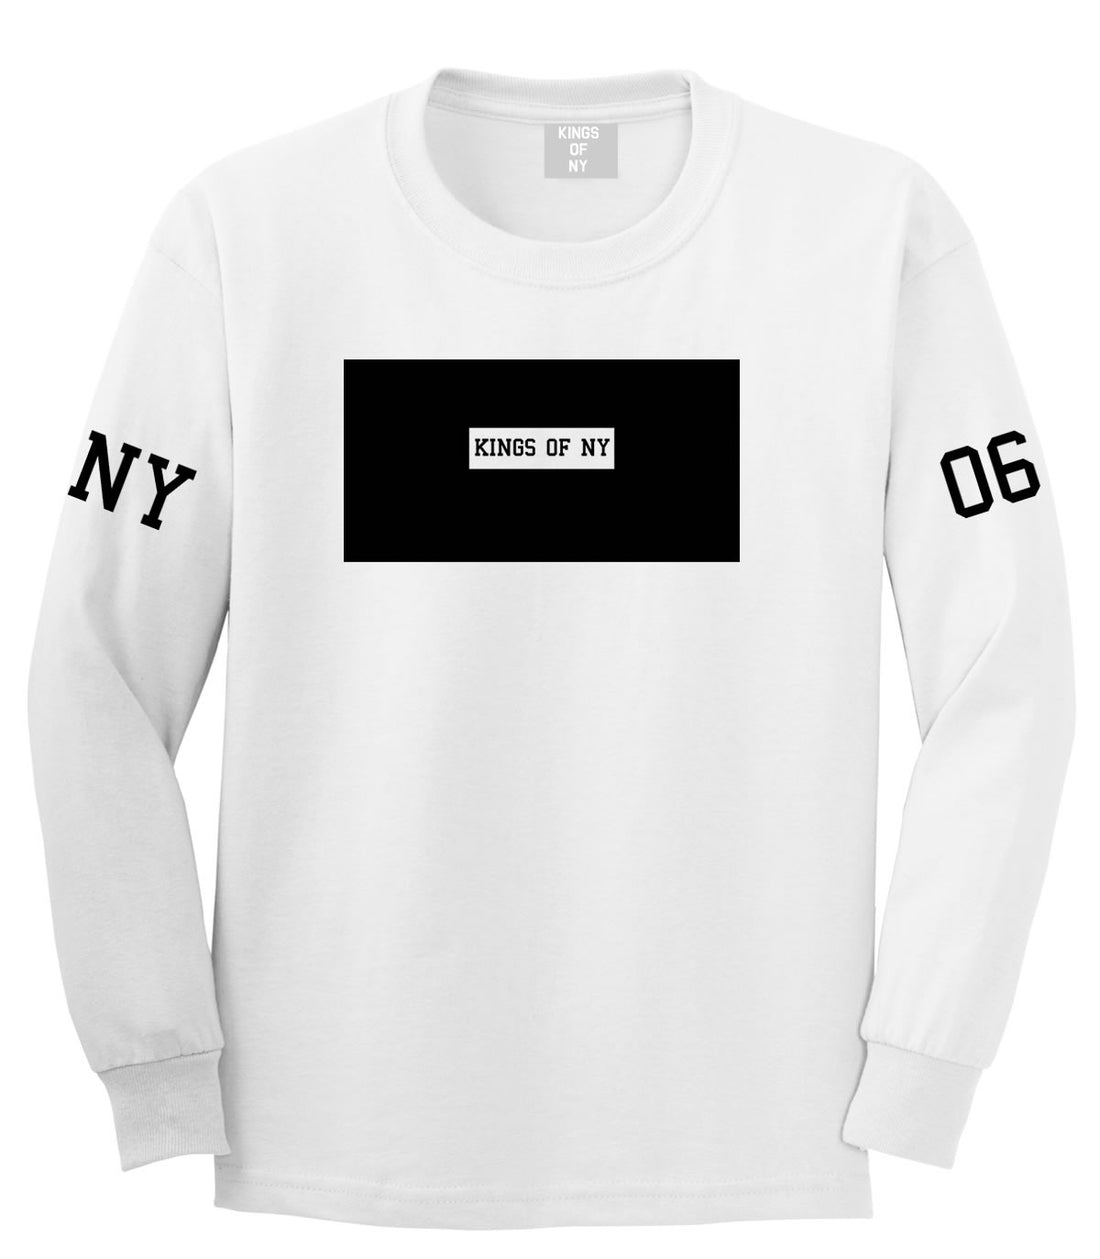 New York Logo 2006 Style Trill Long Sleeve Boys Kids T-Shirt in White by Kings Of NY